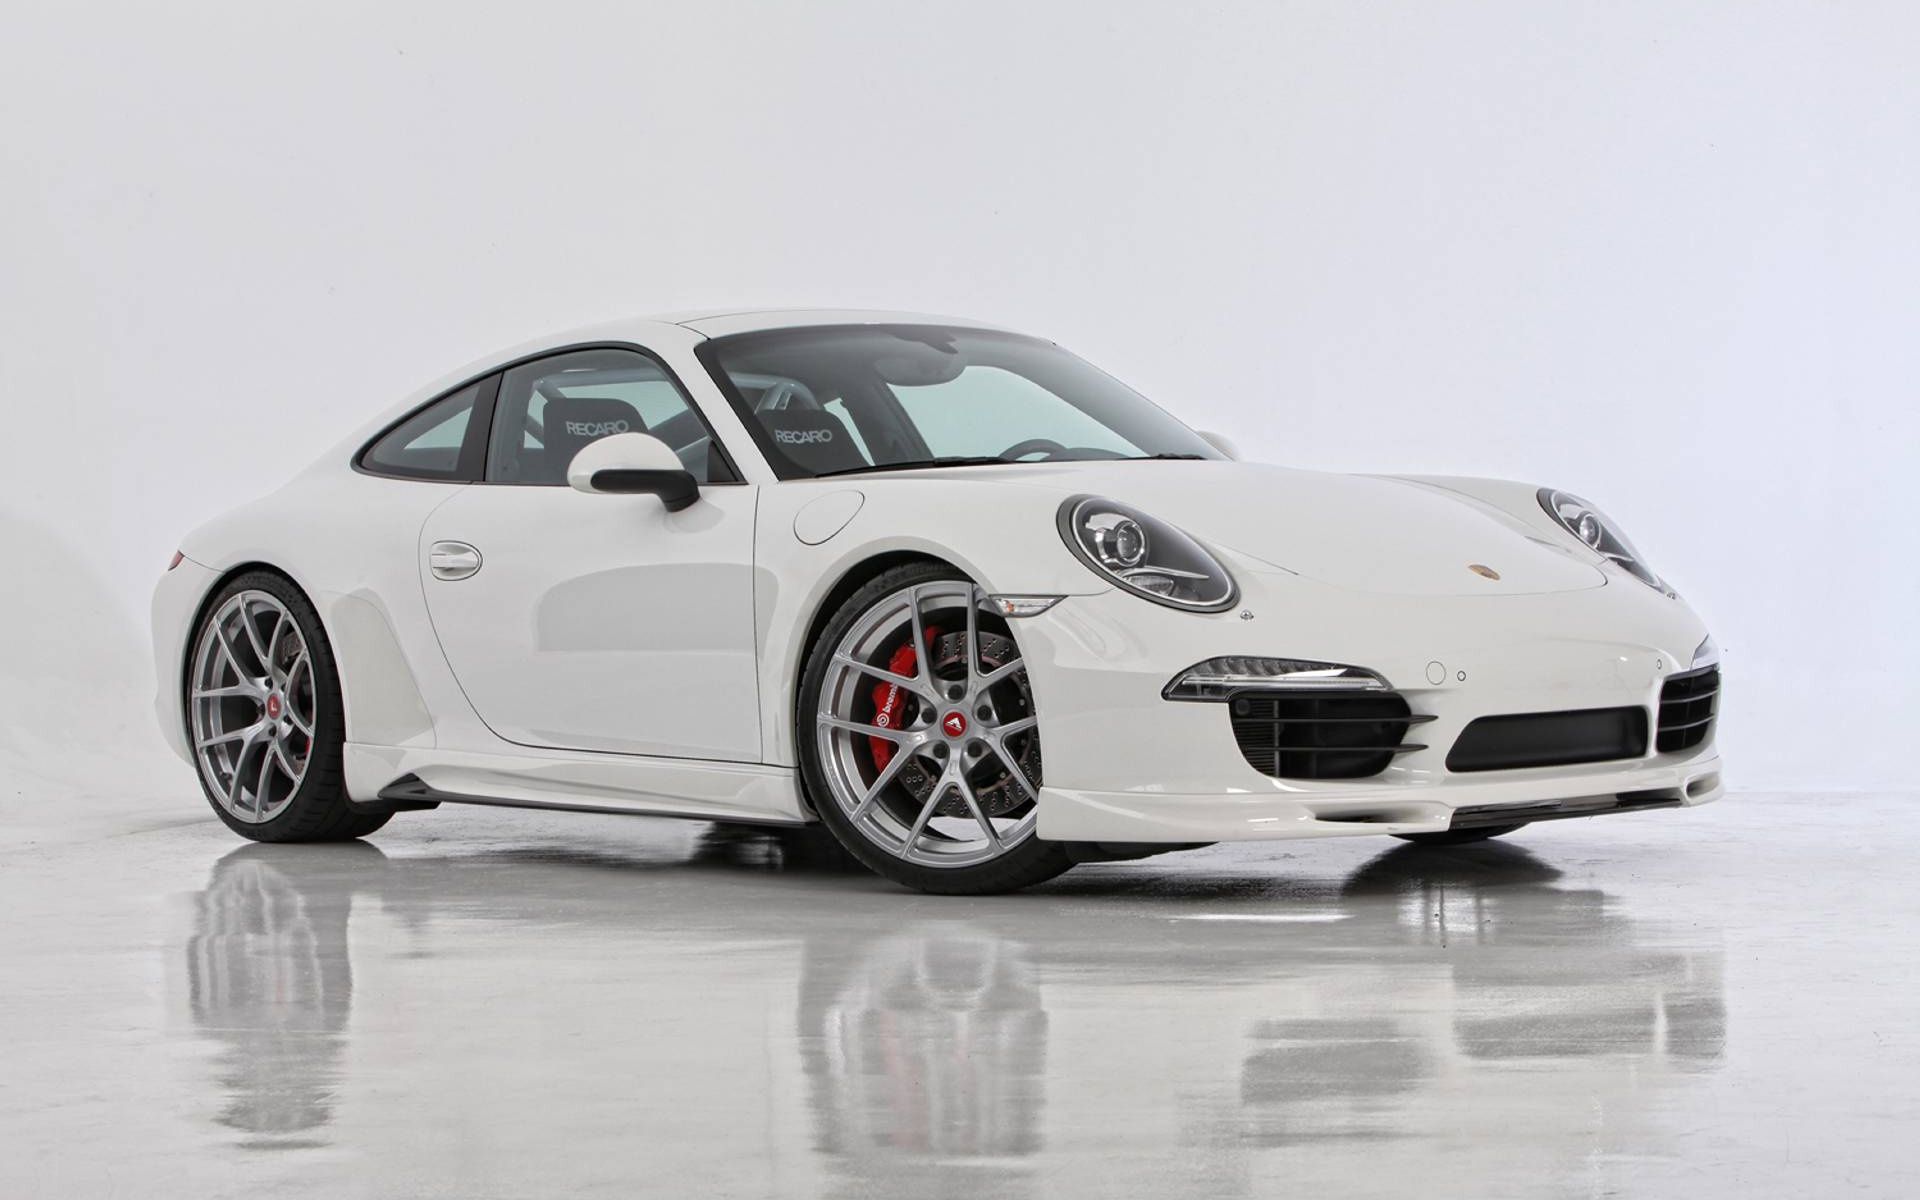 Click To Free Download The Wallpaper A White Porsche Car In Stop